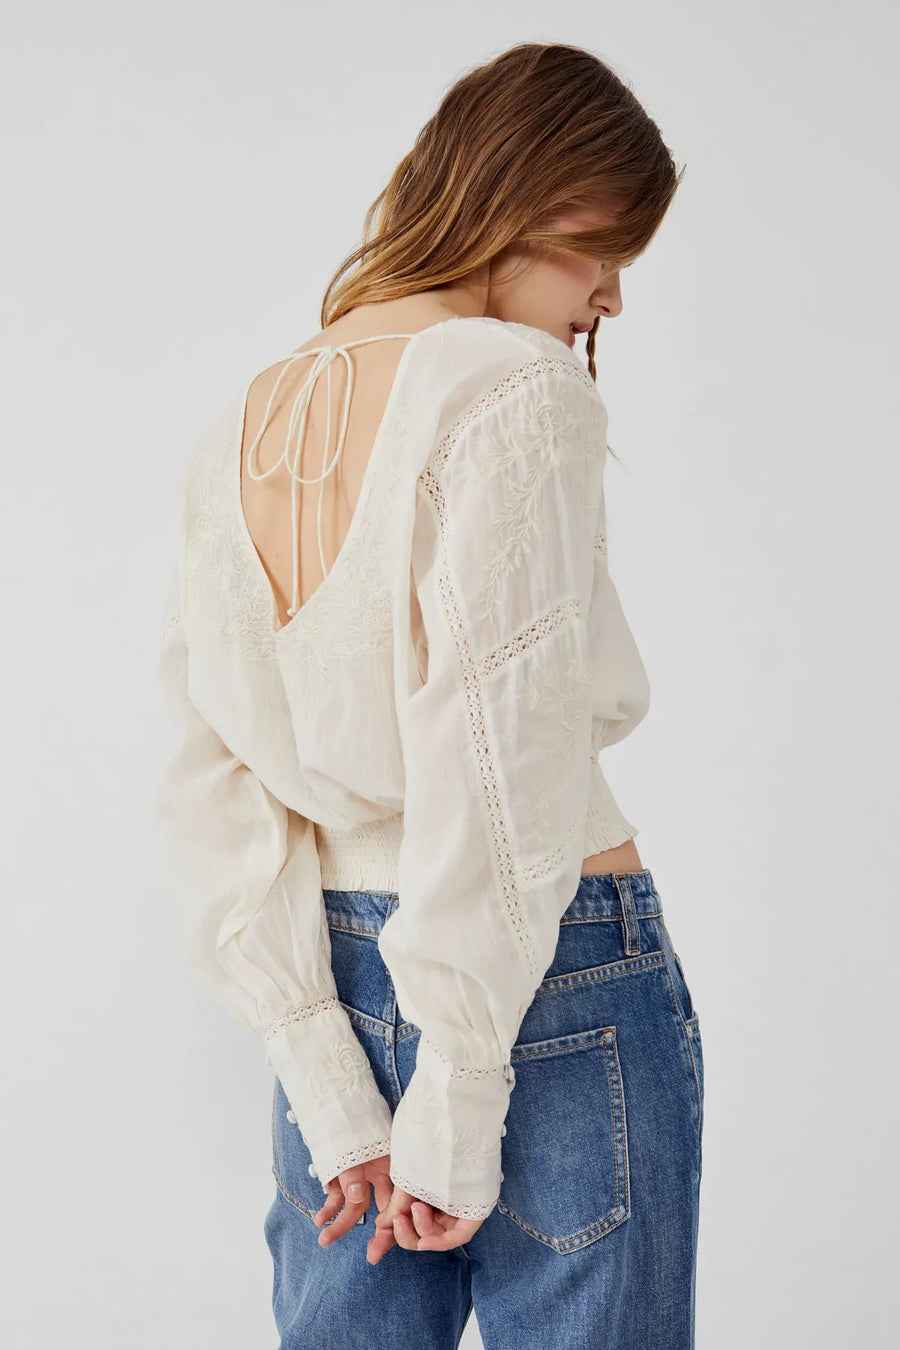 Free People Lucky Me Lace top